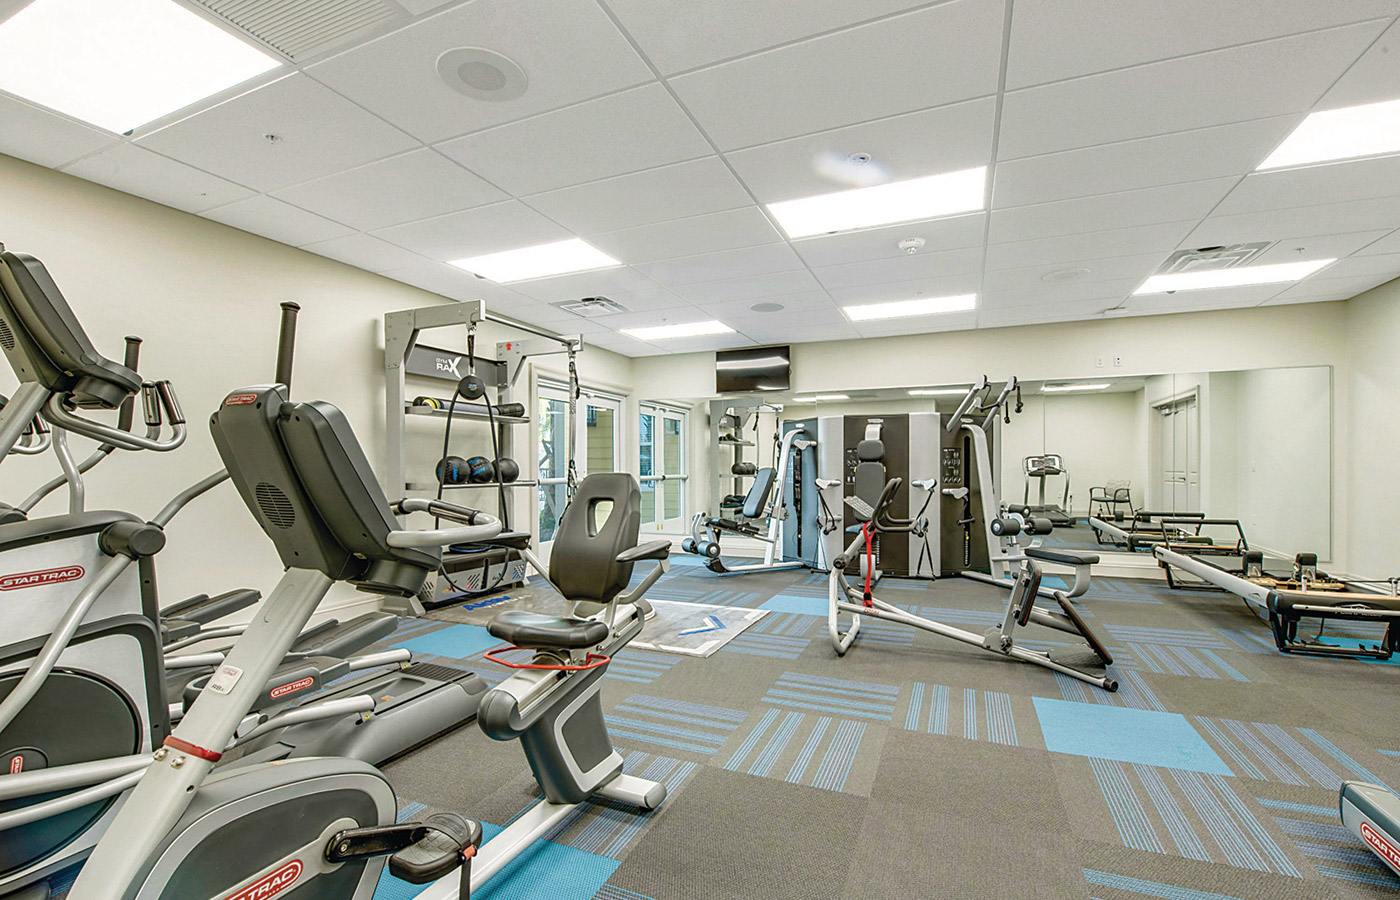 A fitness area at The Watermark at Trinity.